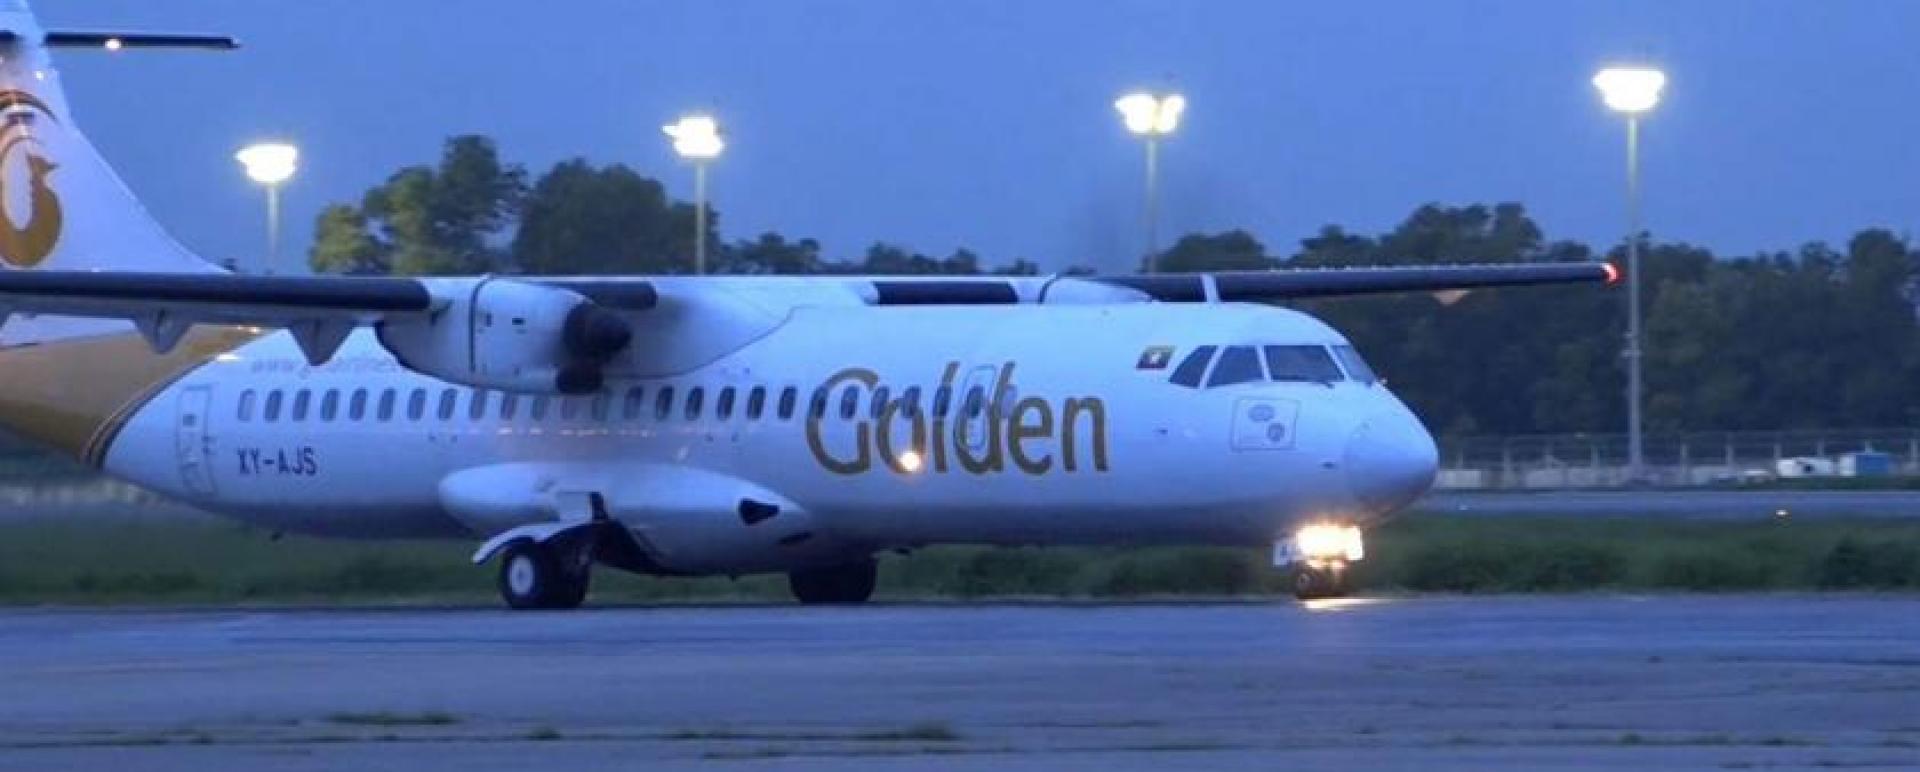 A new ATR plane from Golden Myanmar Airlines